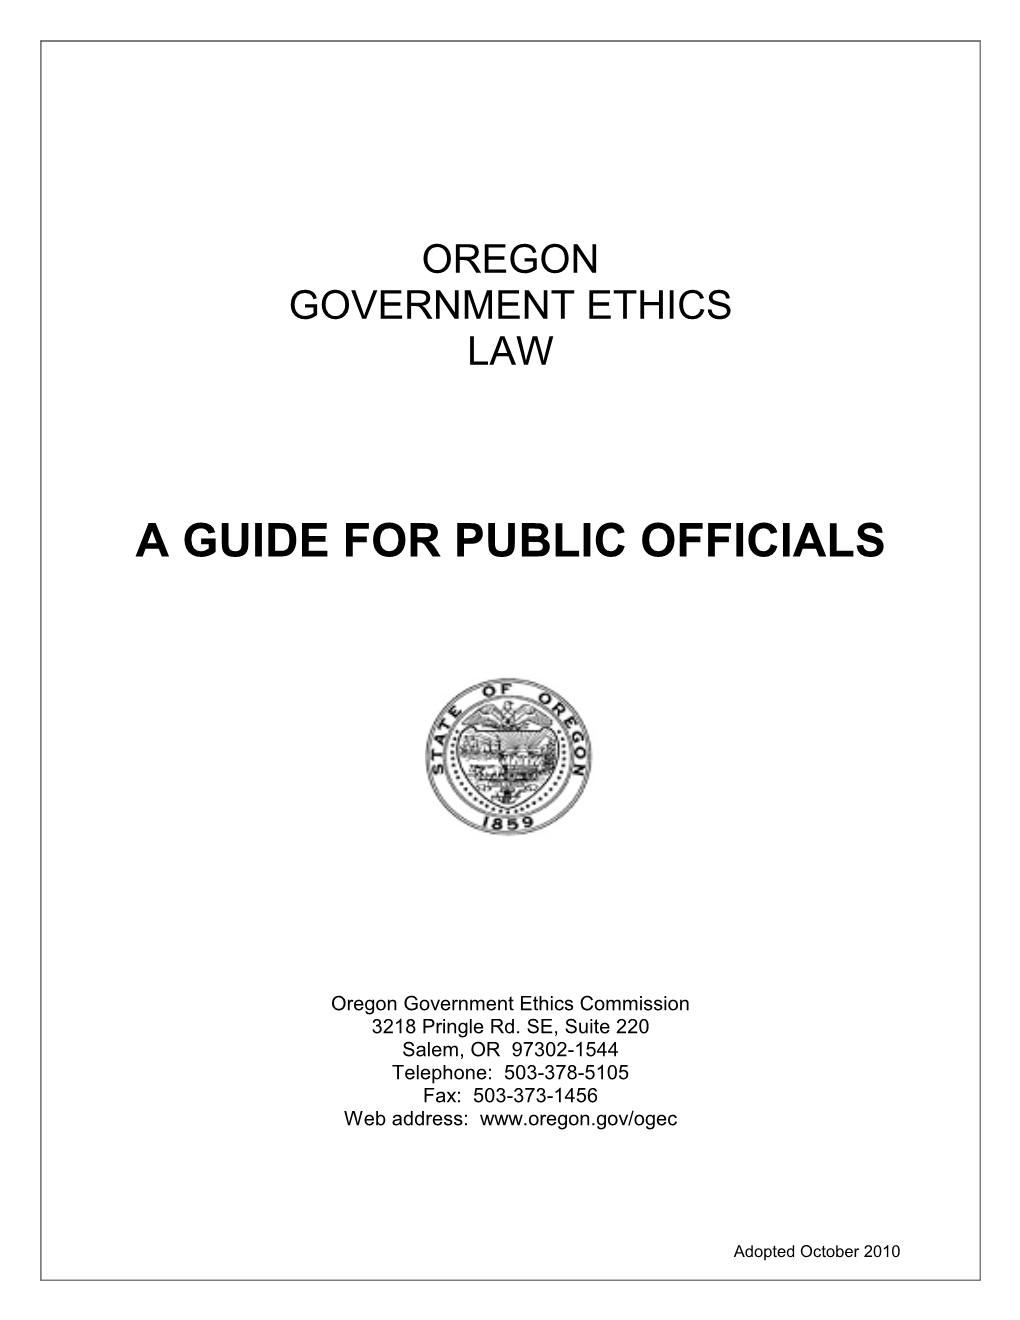 A Guide for Public Officials